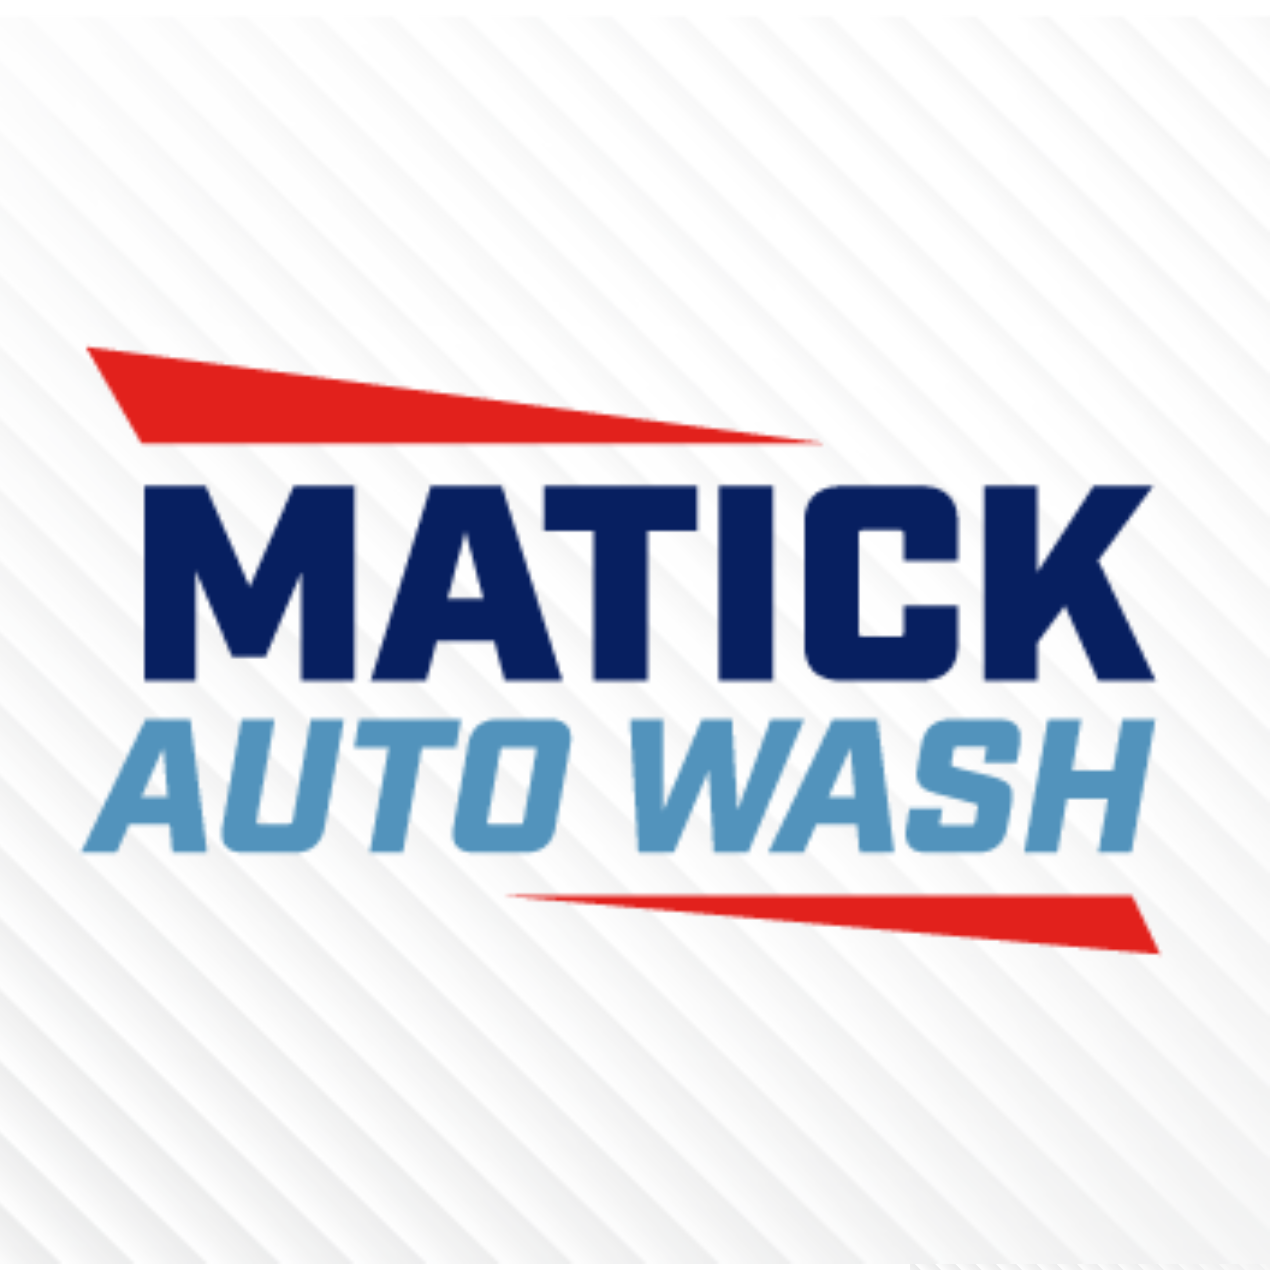 Matic Auto Group